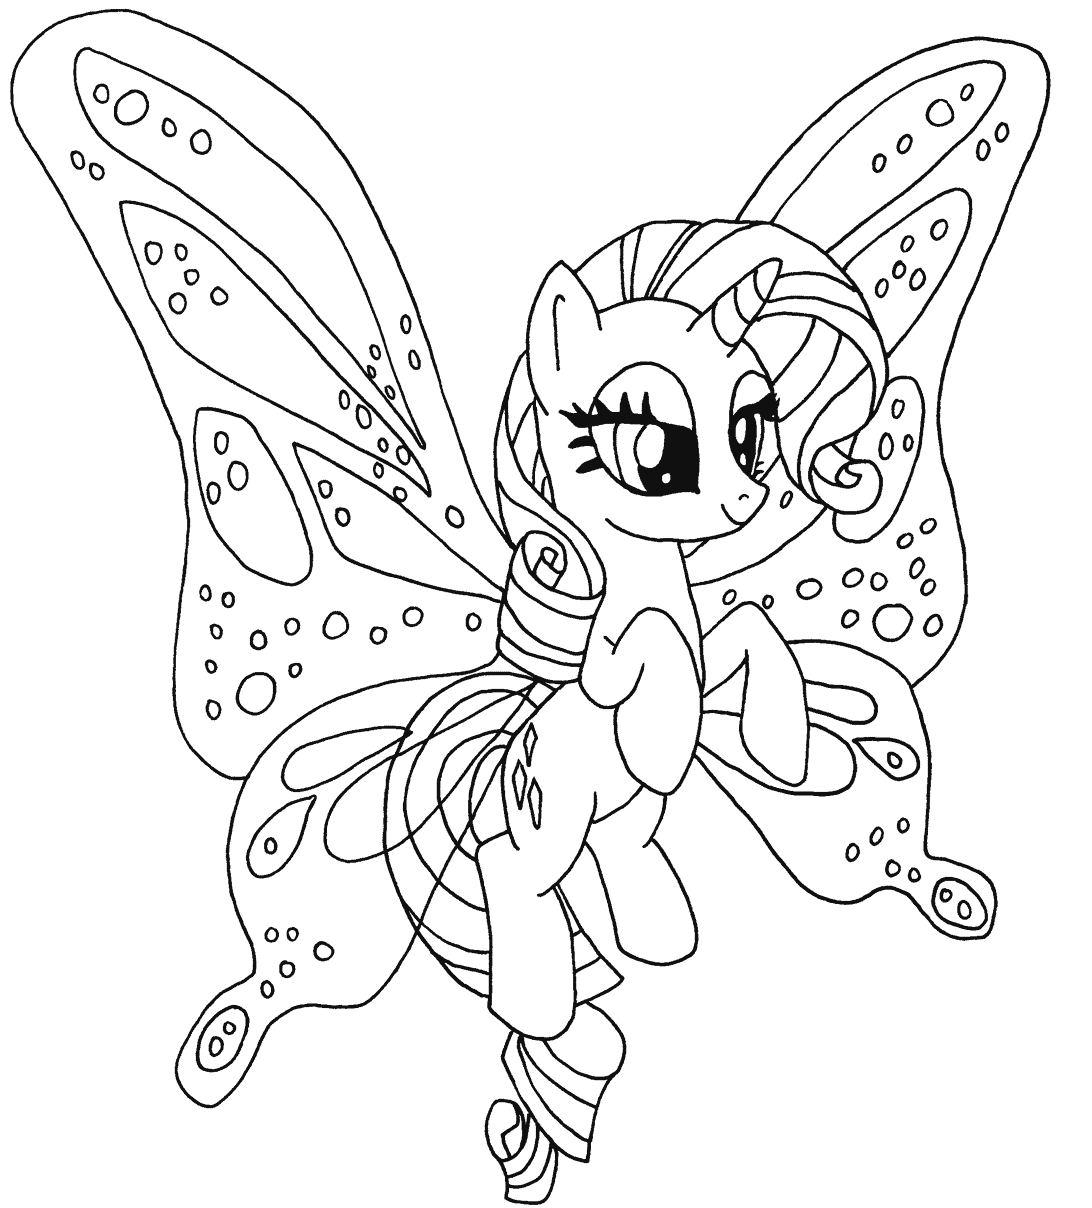 Little Pony Flying Coloring Page Free Printable Coloring Pages For Kids